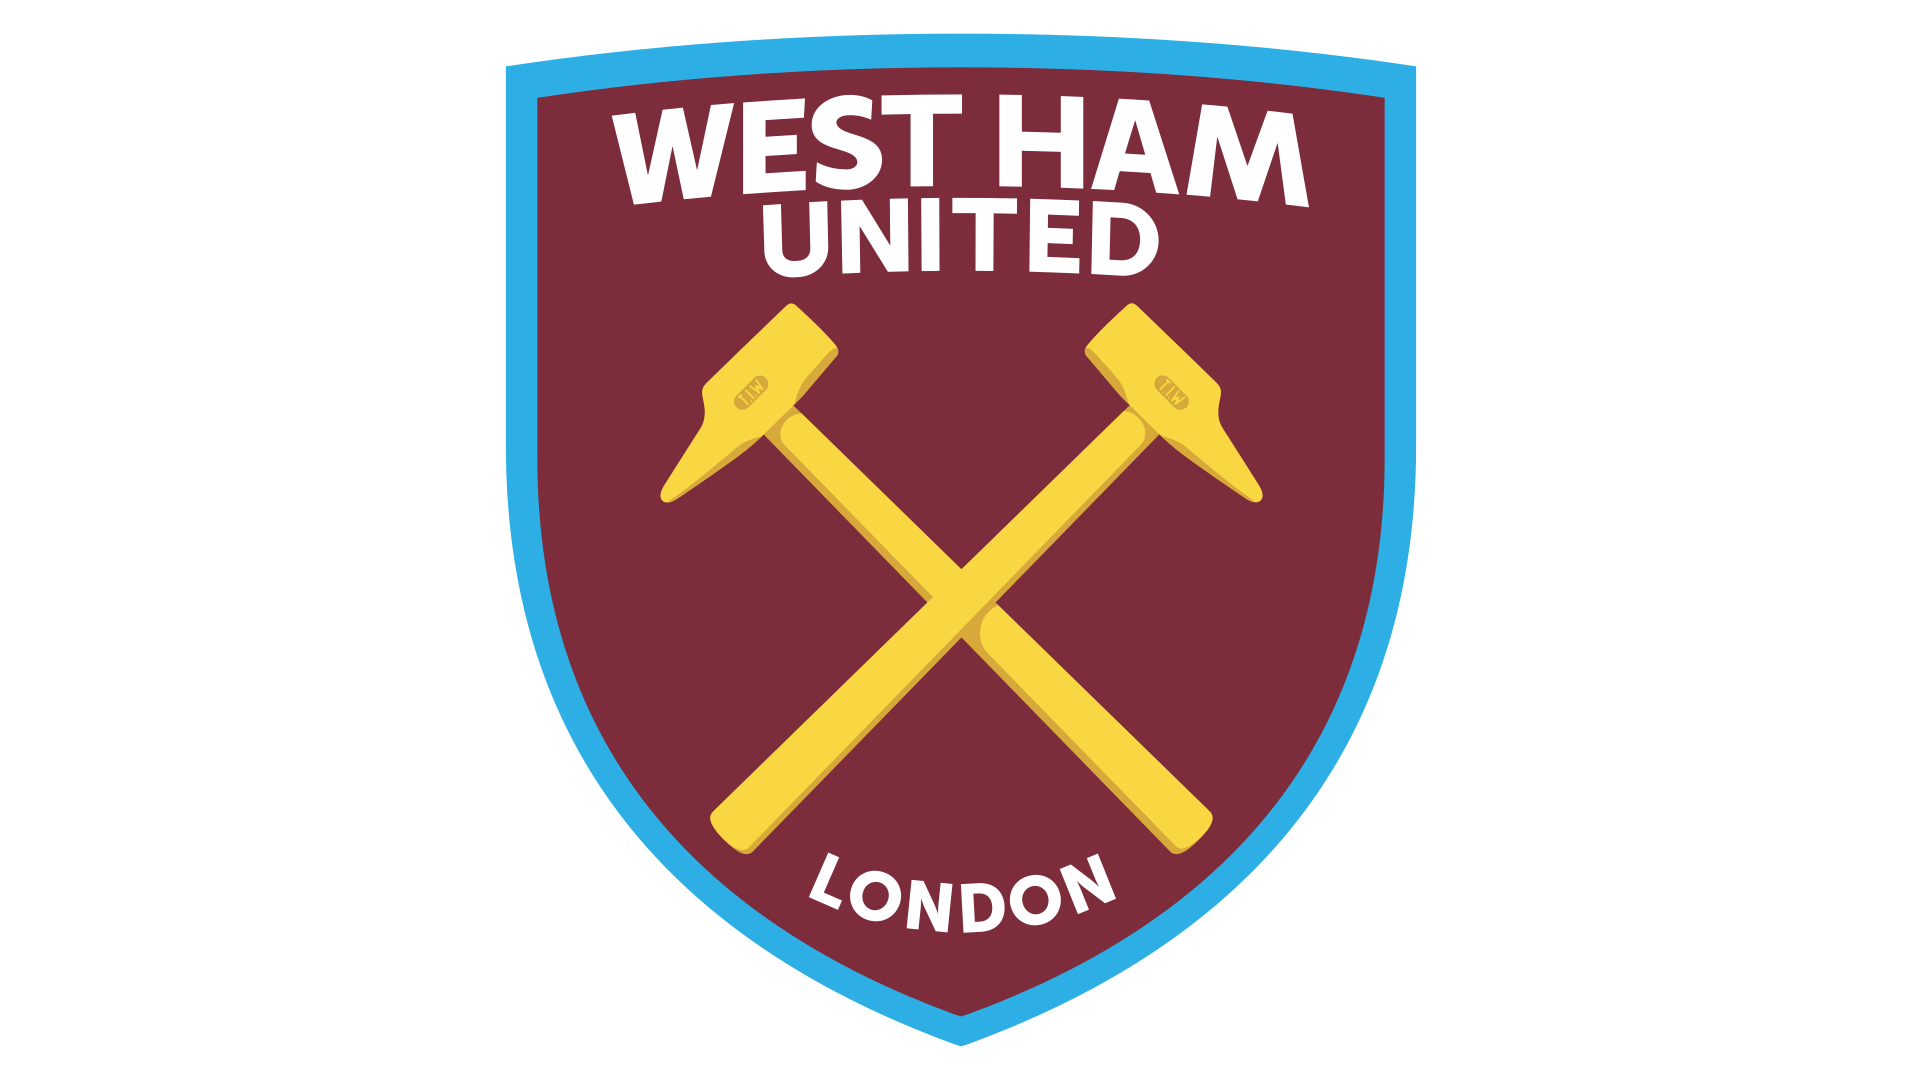 West Ham Logo - West Ham United logo, West Ham United Symbol, Meaning, History and ...